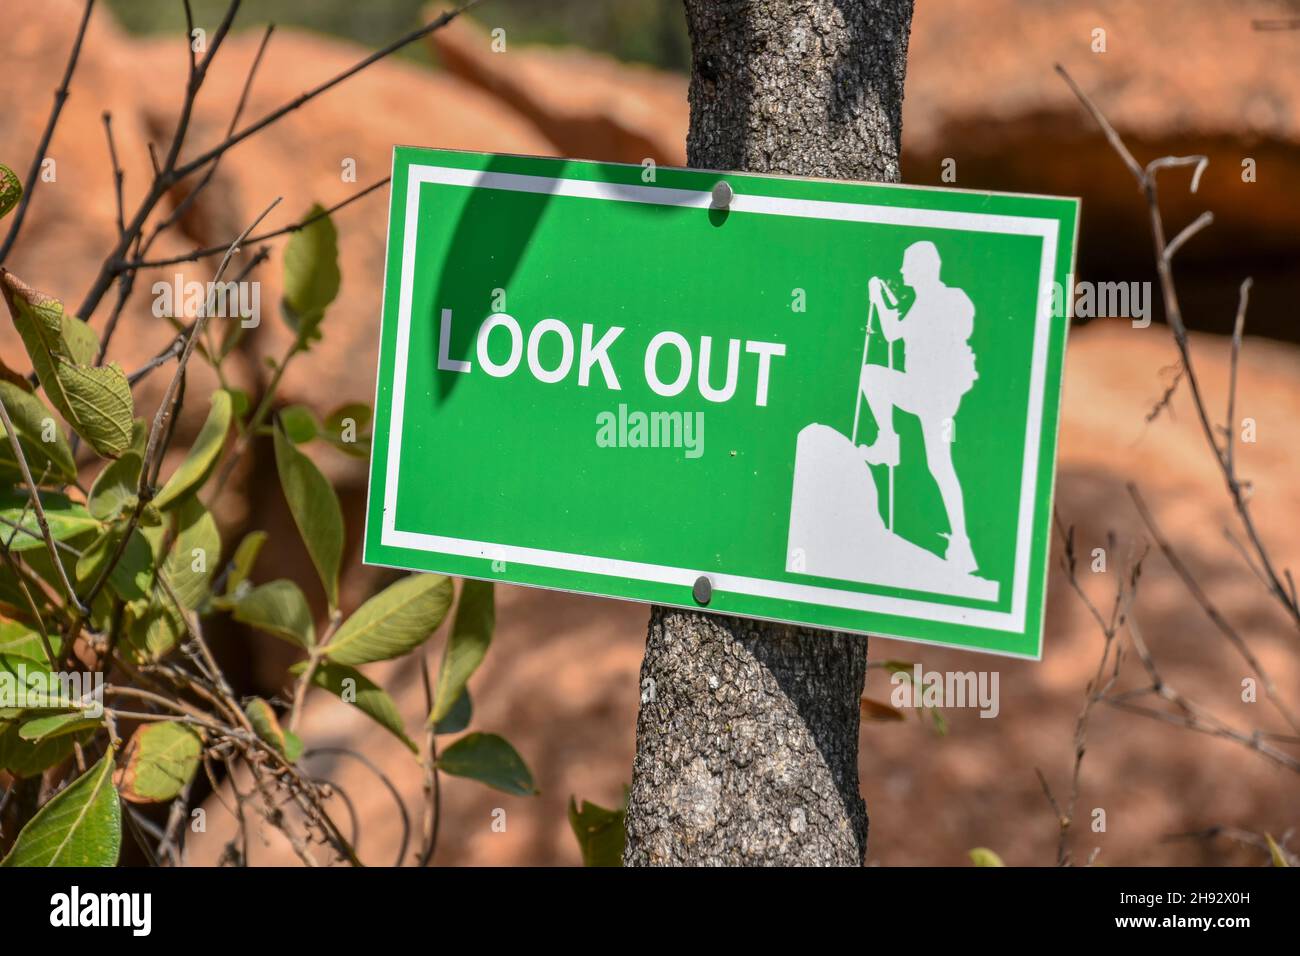 A hiking sign for a look out in the Trichardspoort River Valley, Gouwsberg Mountain Range near the Wilge River in the vicinity of Bronkhorstspruit eas Stock Photo